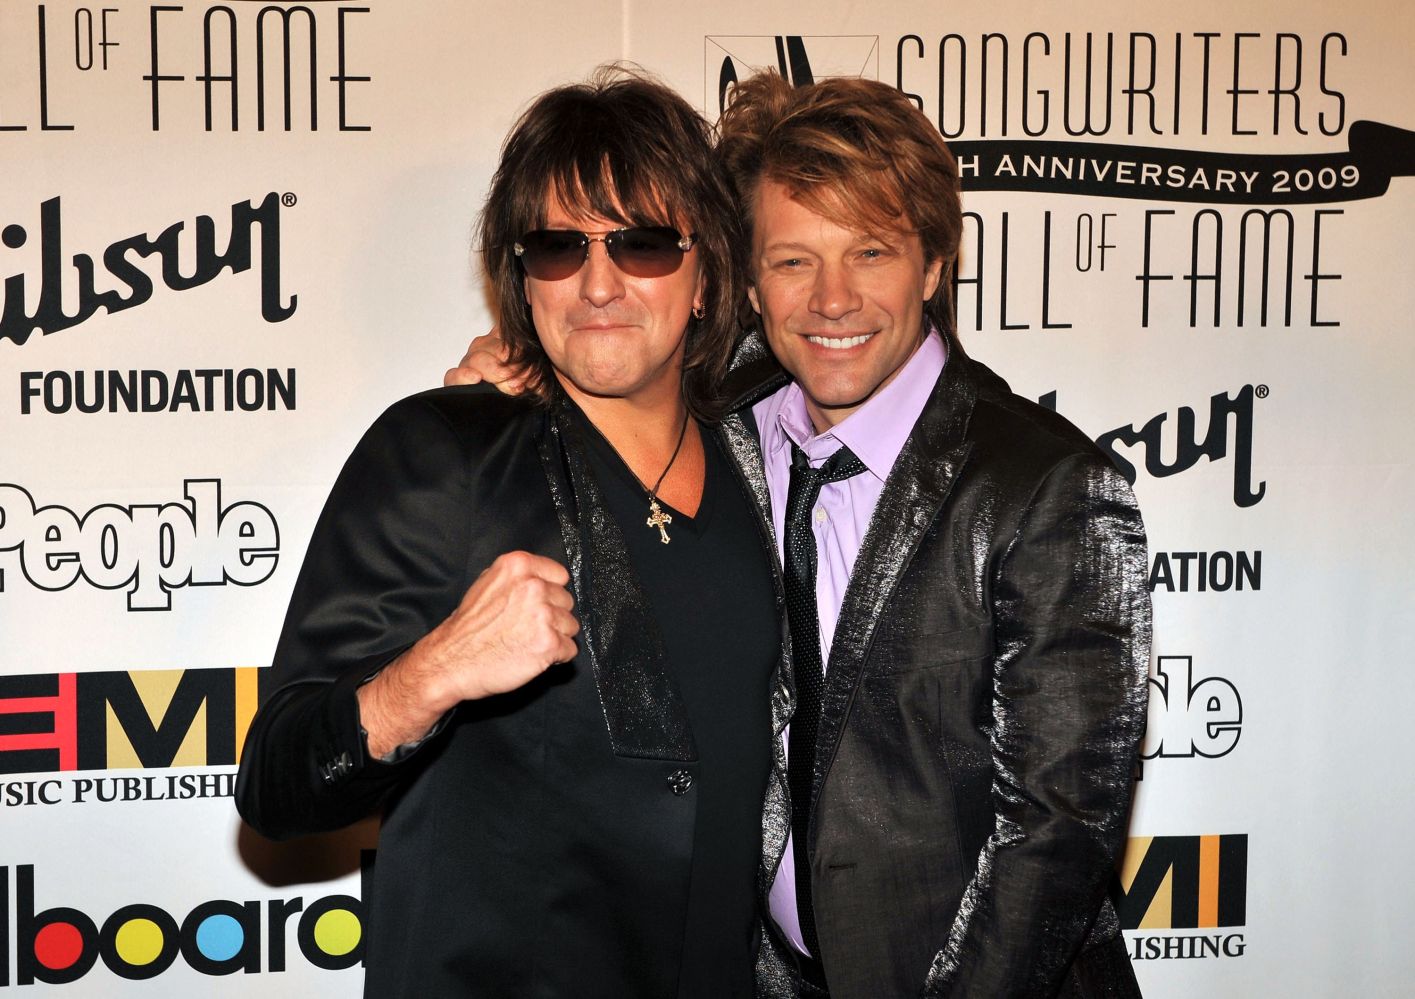 <p>In 2009, Jon Bon Jovi and Richie Sambora were inducted into the Songwriters Hall of Fame alongside luminaries such as Crosby, Stills, and Nash.</p>